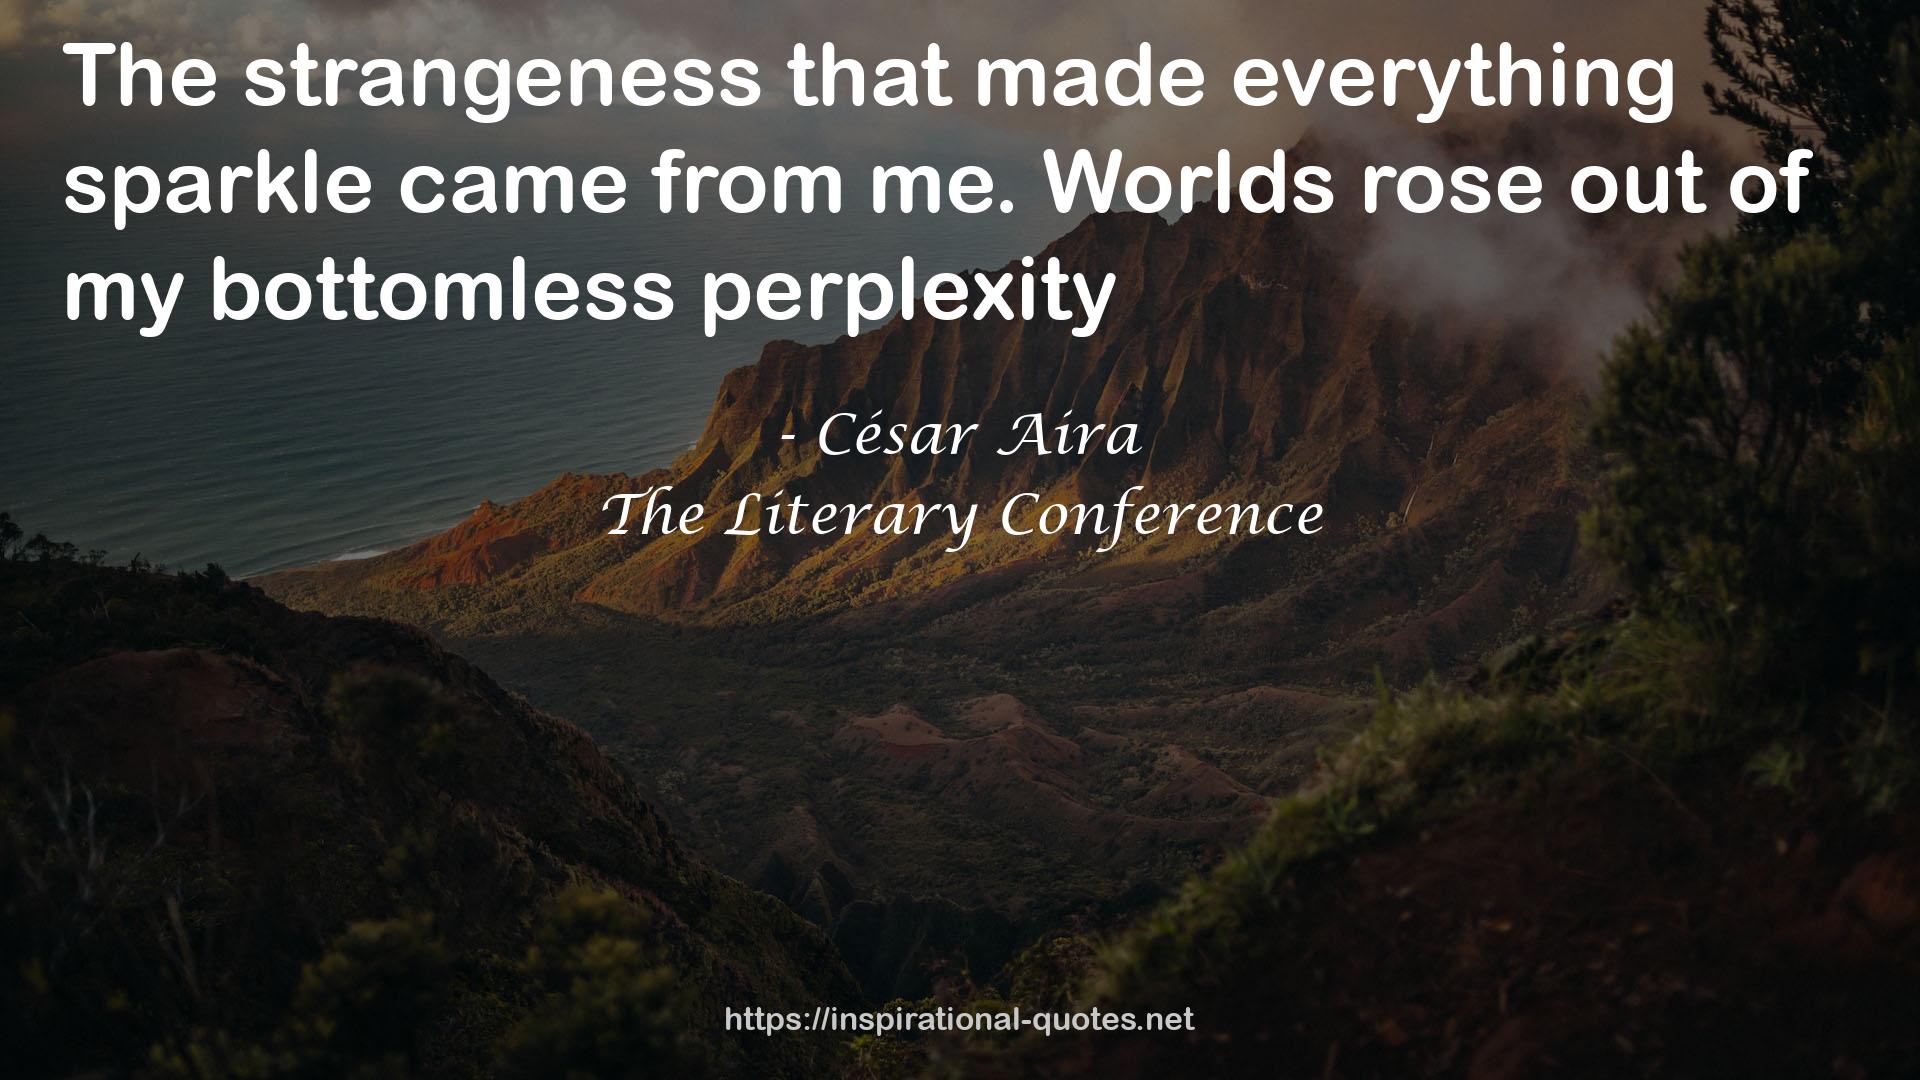 The Literary Conference QUOTES